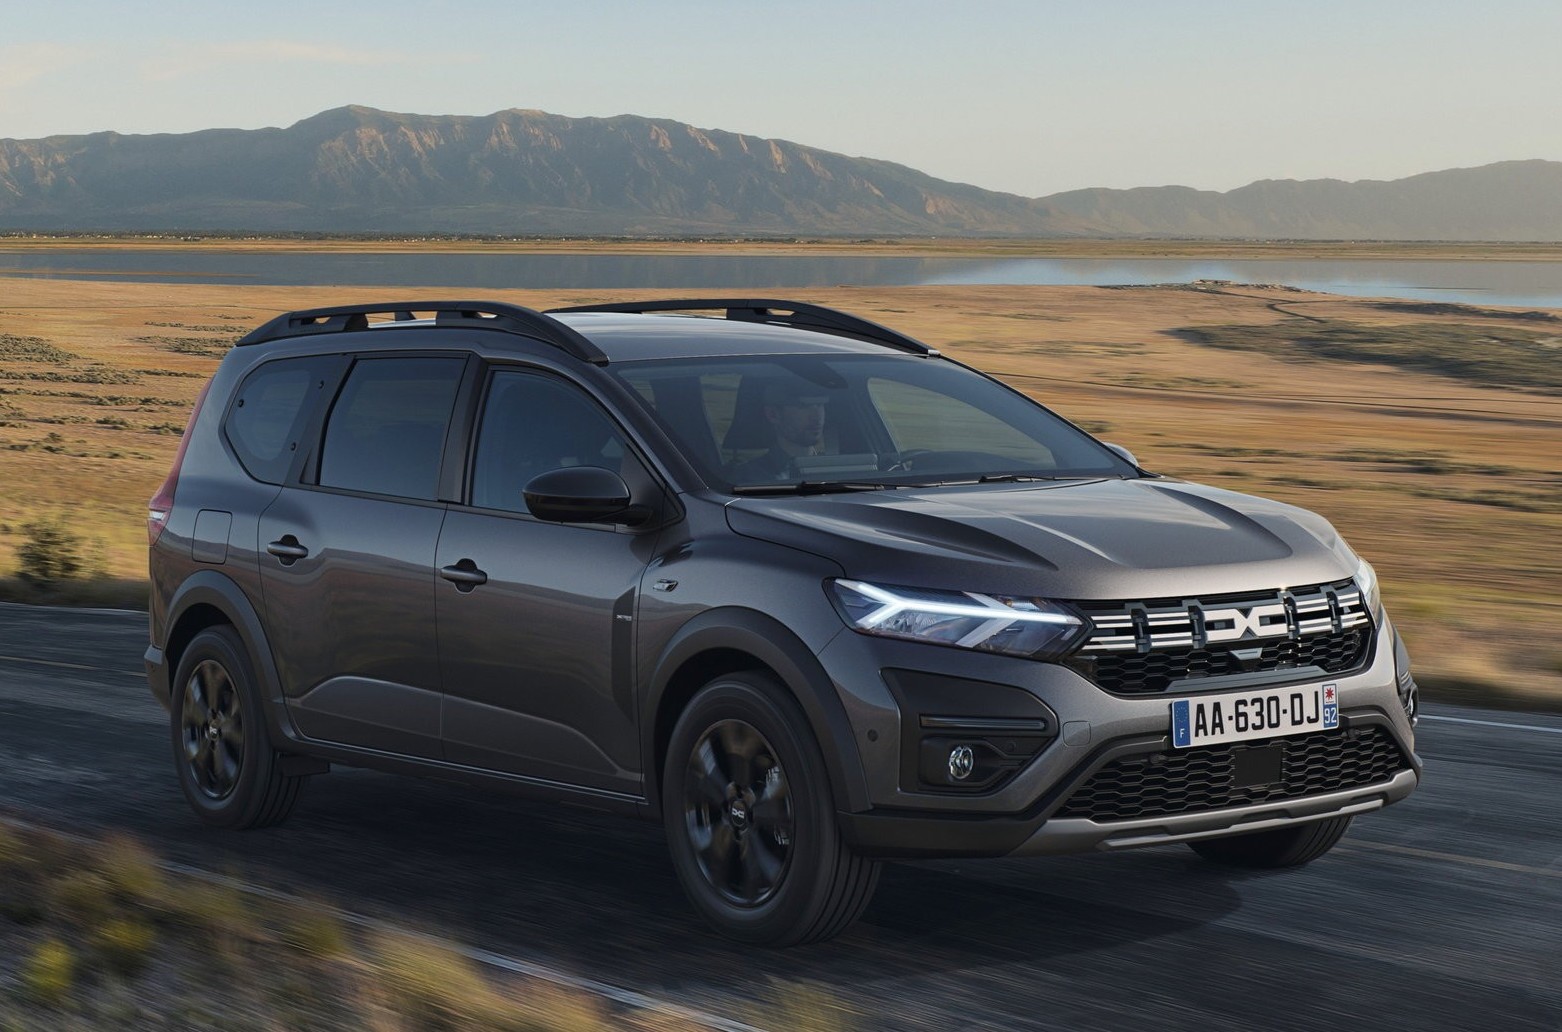 Road test and reviews of the new 2023 Dacia Jogger, a car that really has everything money can buy